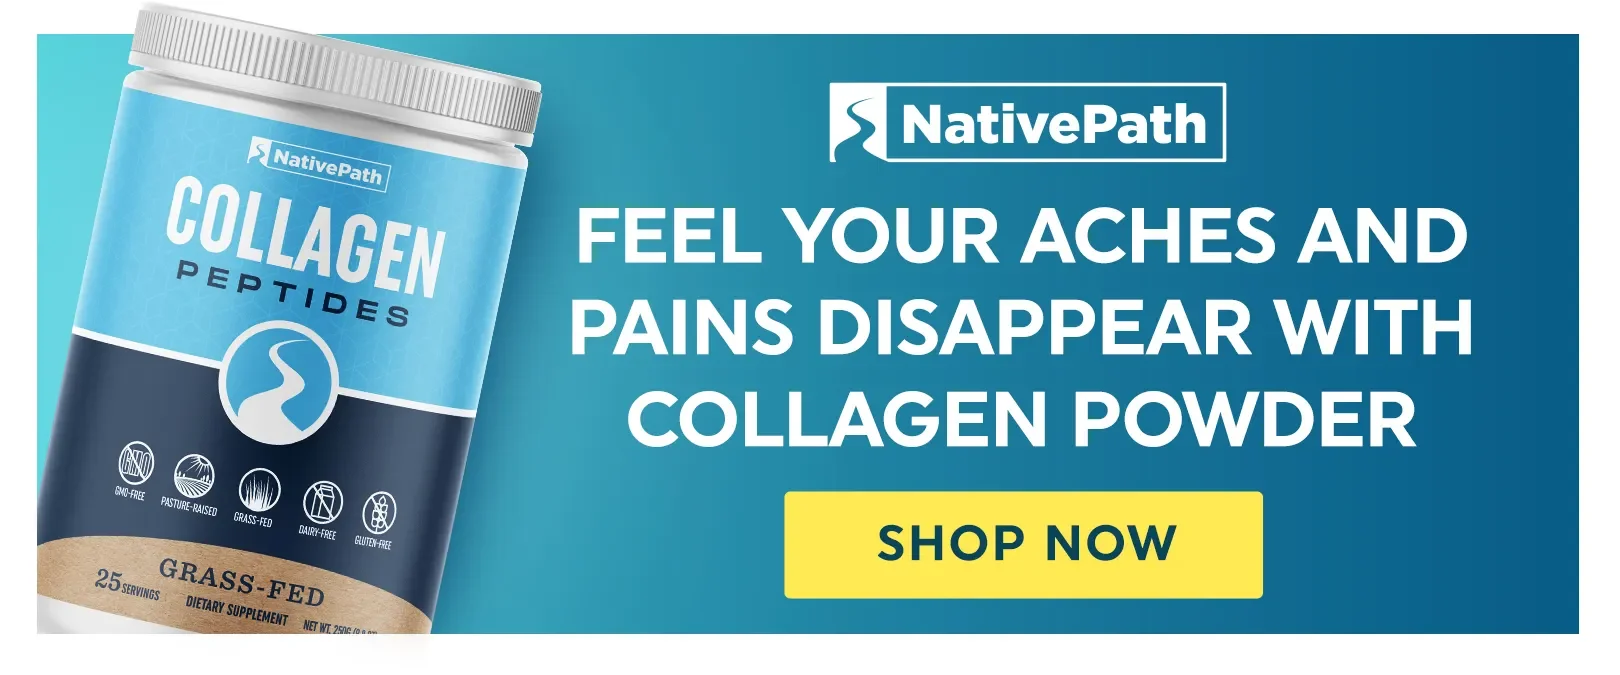 Grass-Fed Collagen Peptides to Reduce Aches and Pains